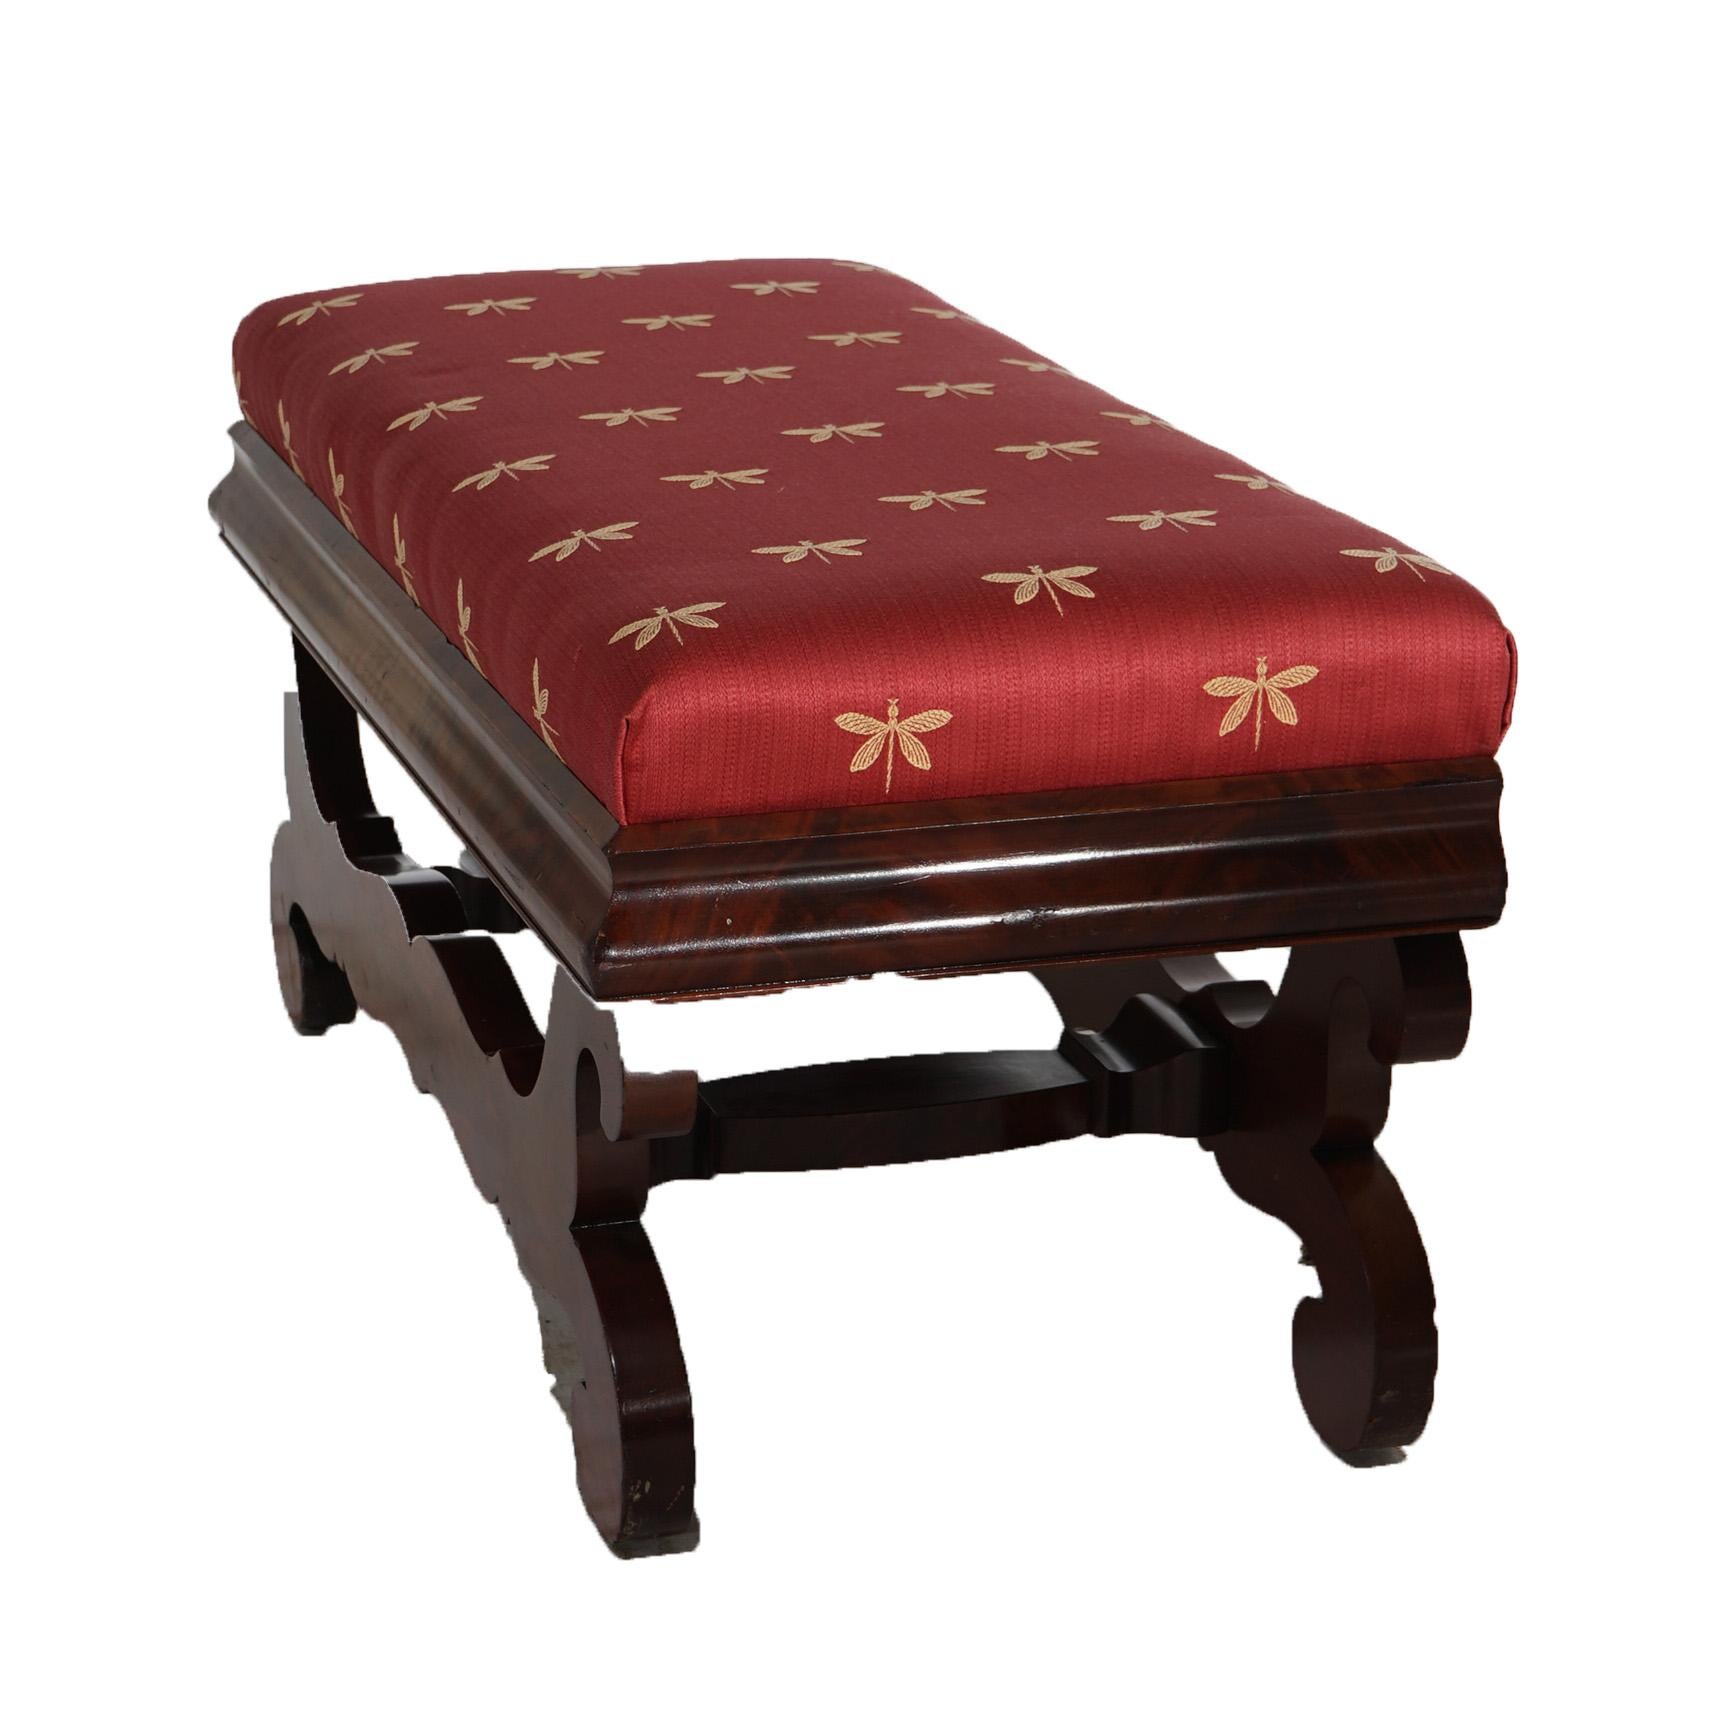 An antique Greco American Empire long bench in the manner of Meeks offers upholstered seat over stylized scroll form trestle base, c1840

Measures- 18.5''H x 39.75''W x 17.75''D